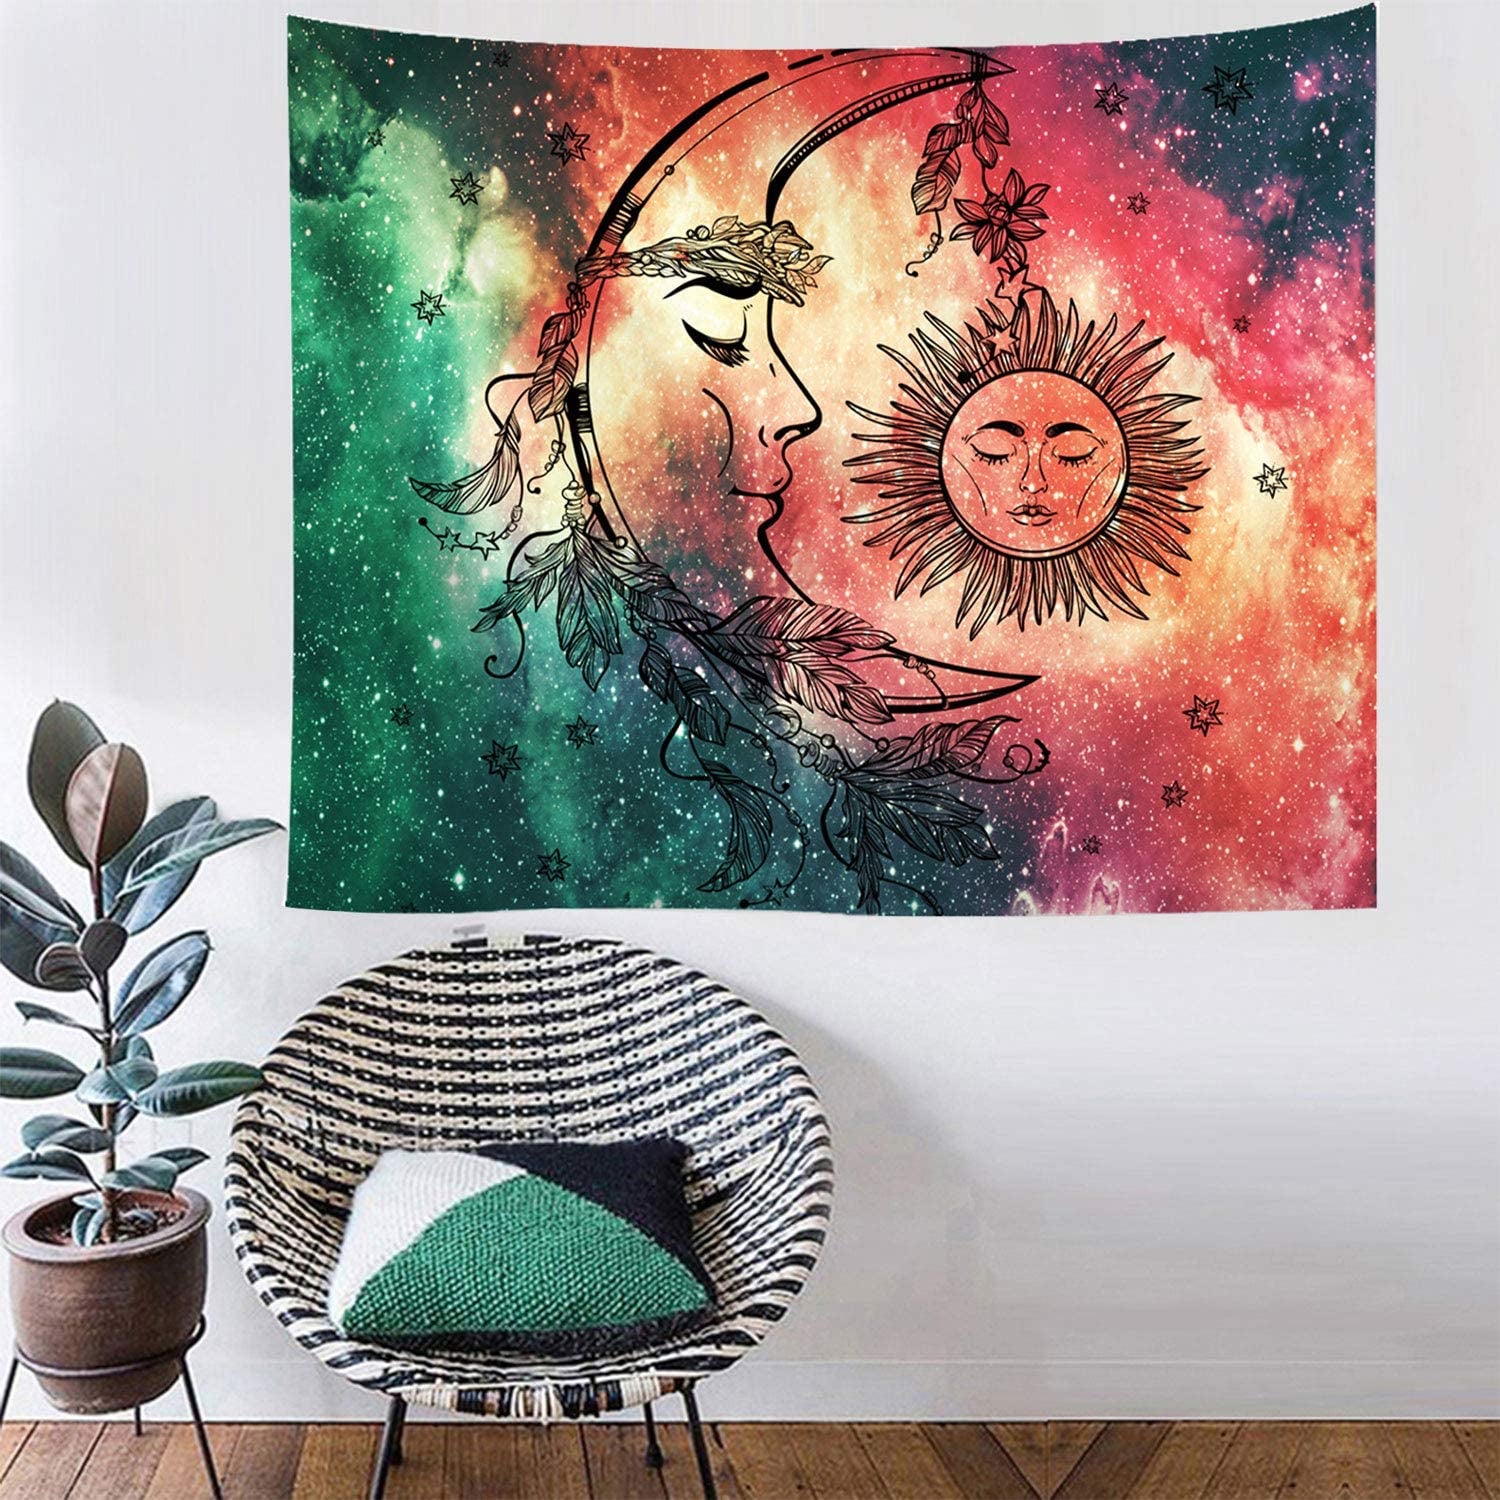 Psychedelic Tapestry Wall Hanging, Boho Mandala Tapestry, Celestial Starry Sky Wall Tapestry, Wall Art Decoration for Bedroom Living Room Dorm, Window Curtain Picnic Mat